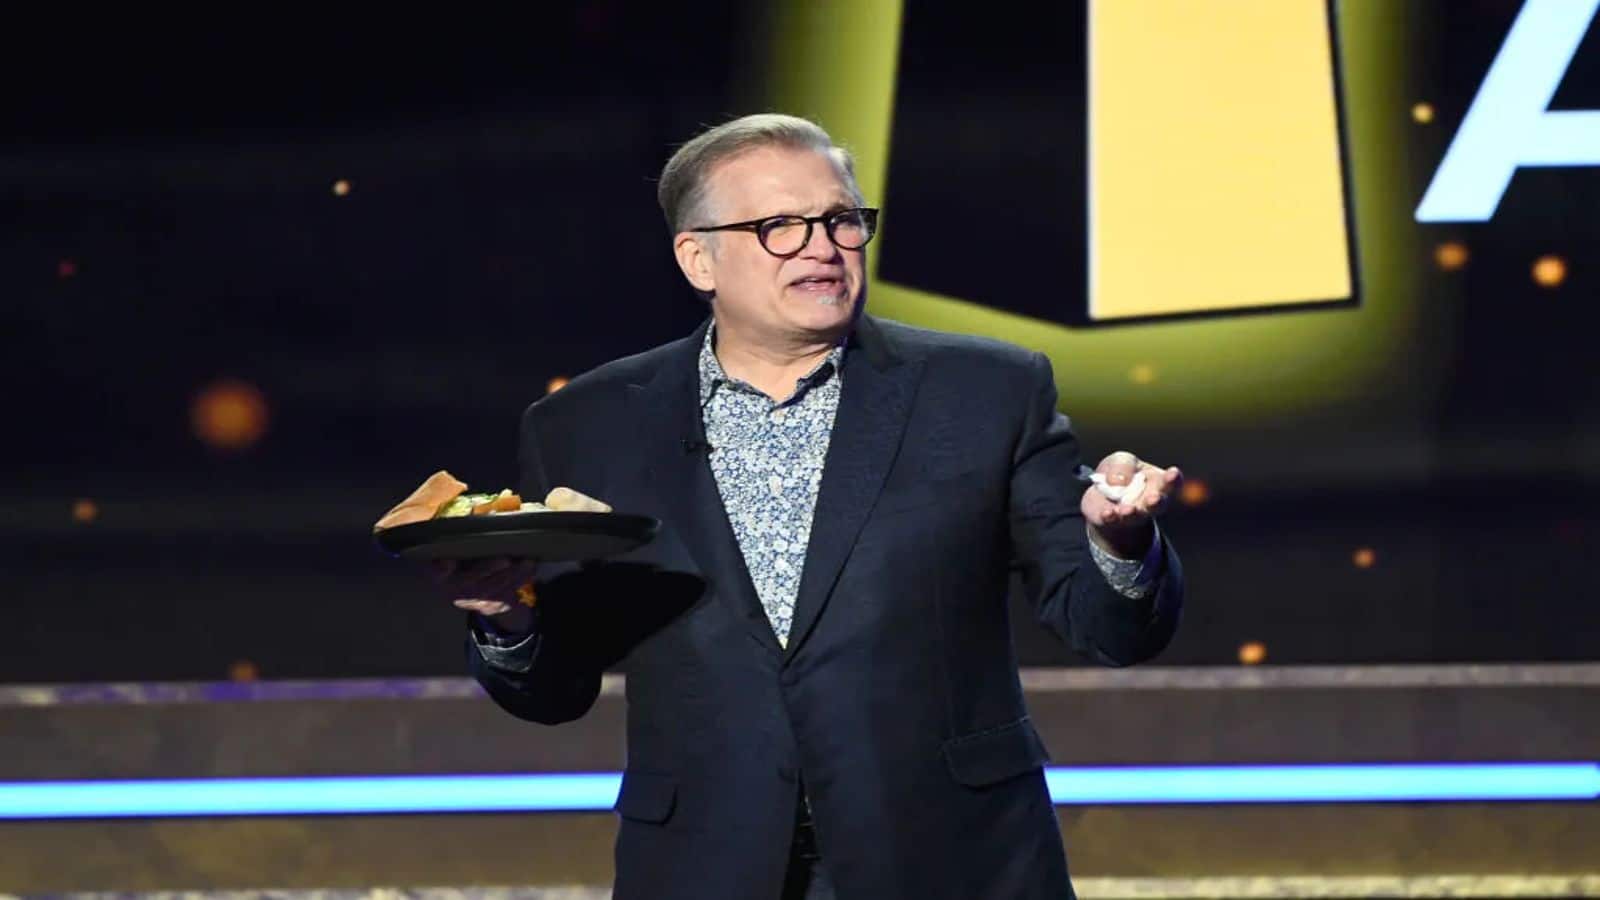 Drew Carey stands with striking writers, reveals funding their meals